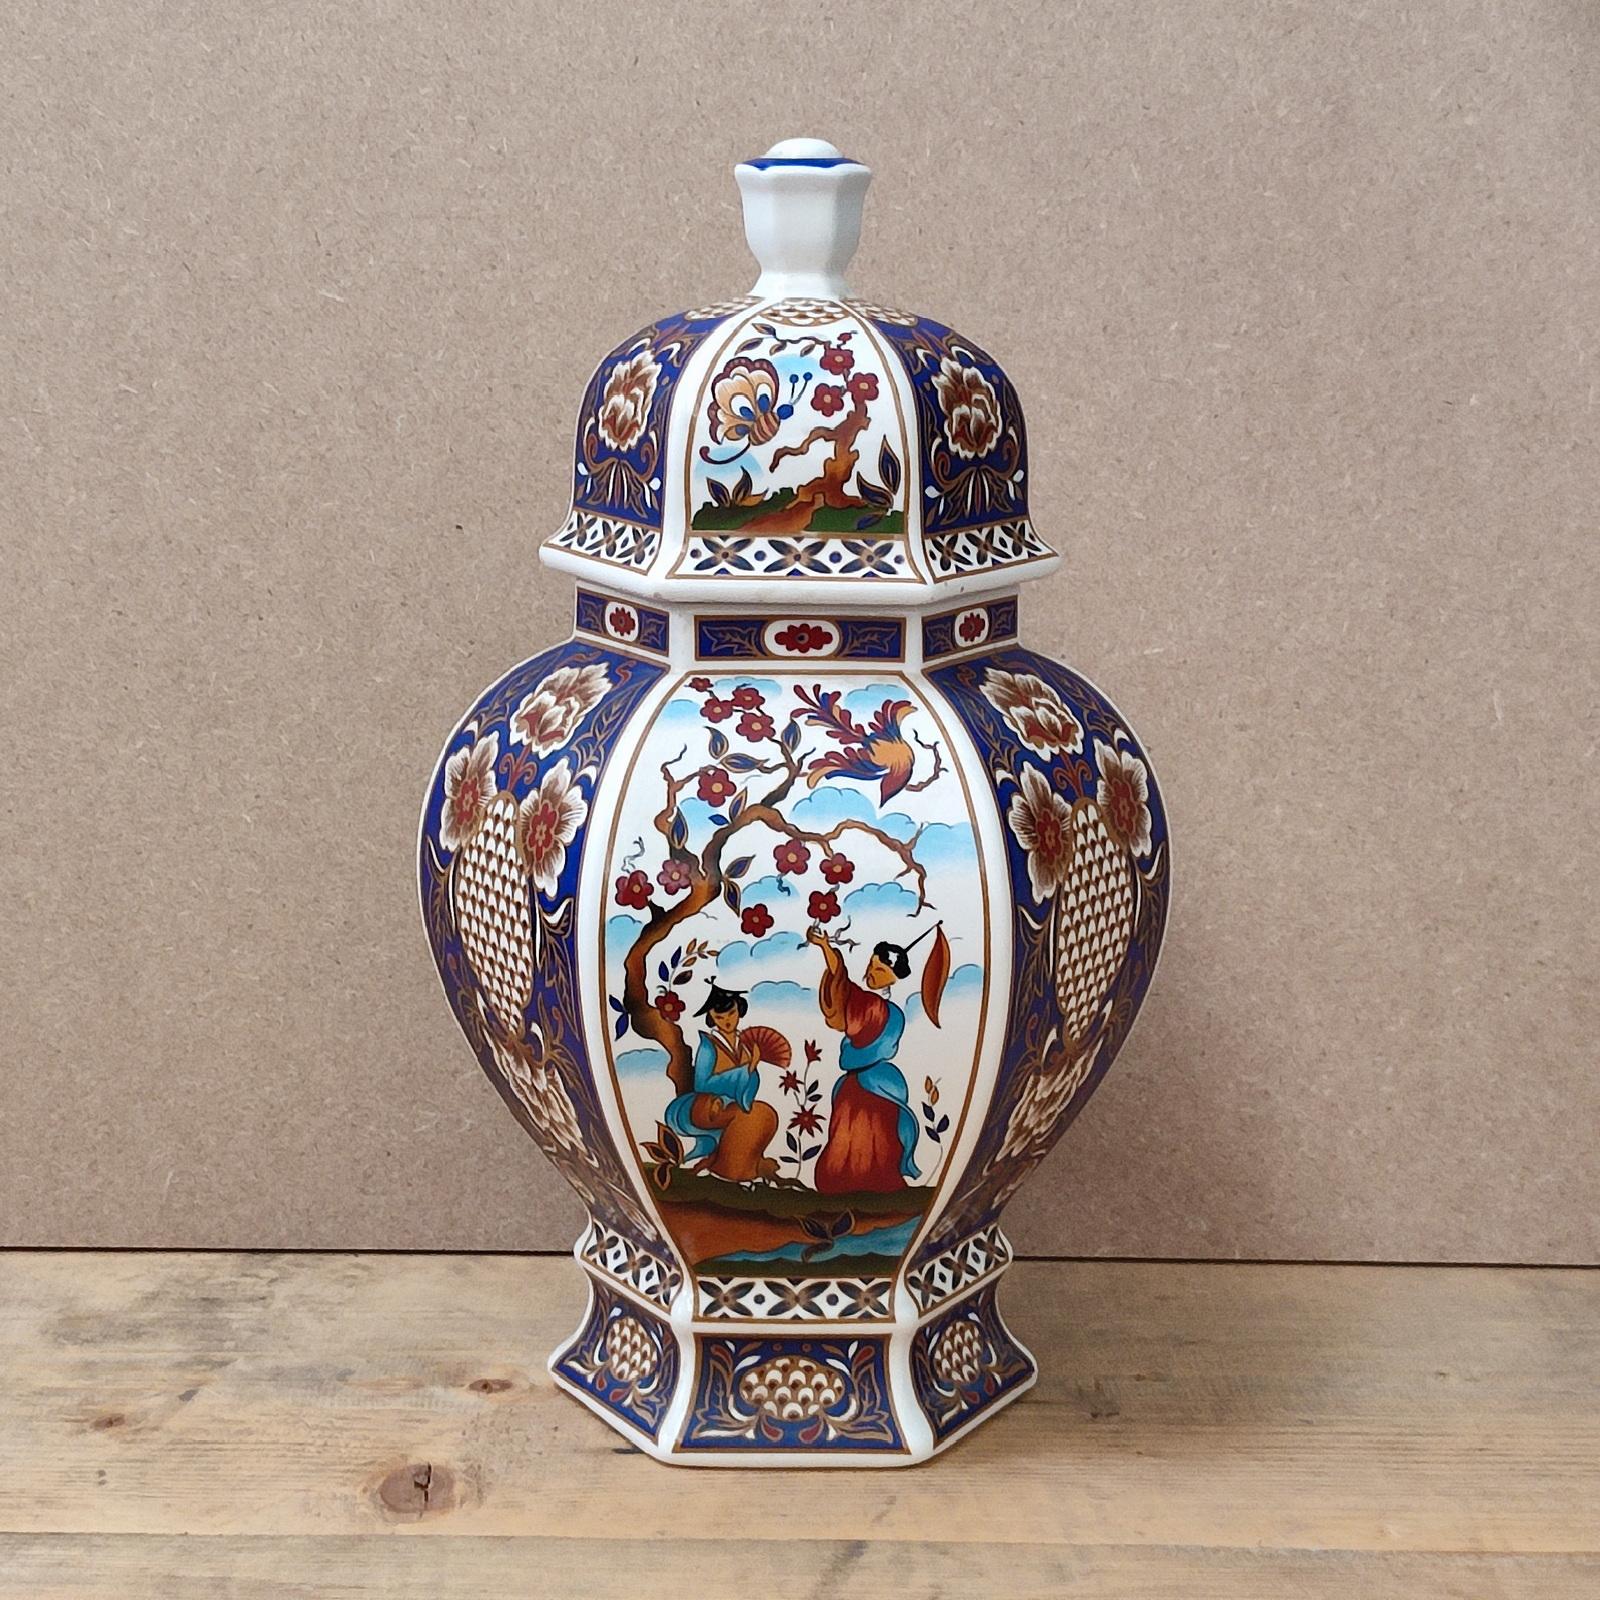 Pair of Japanese Porcelain Table Lamps and a Lidded Urn, Mid-20th Century For Sale 10